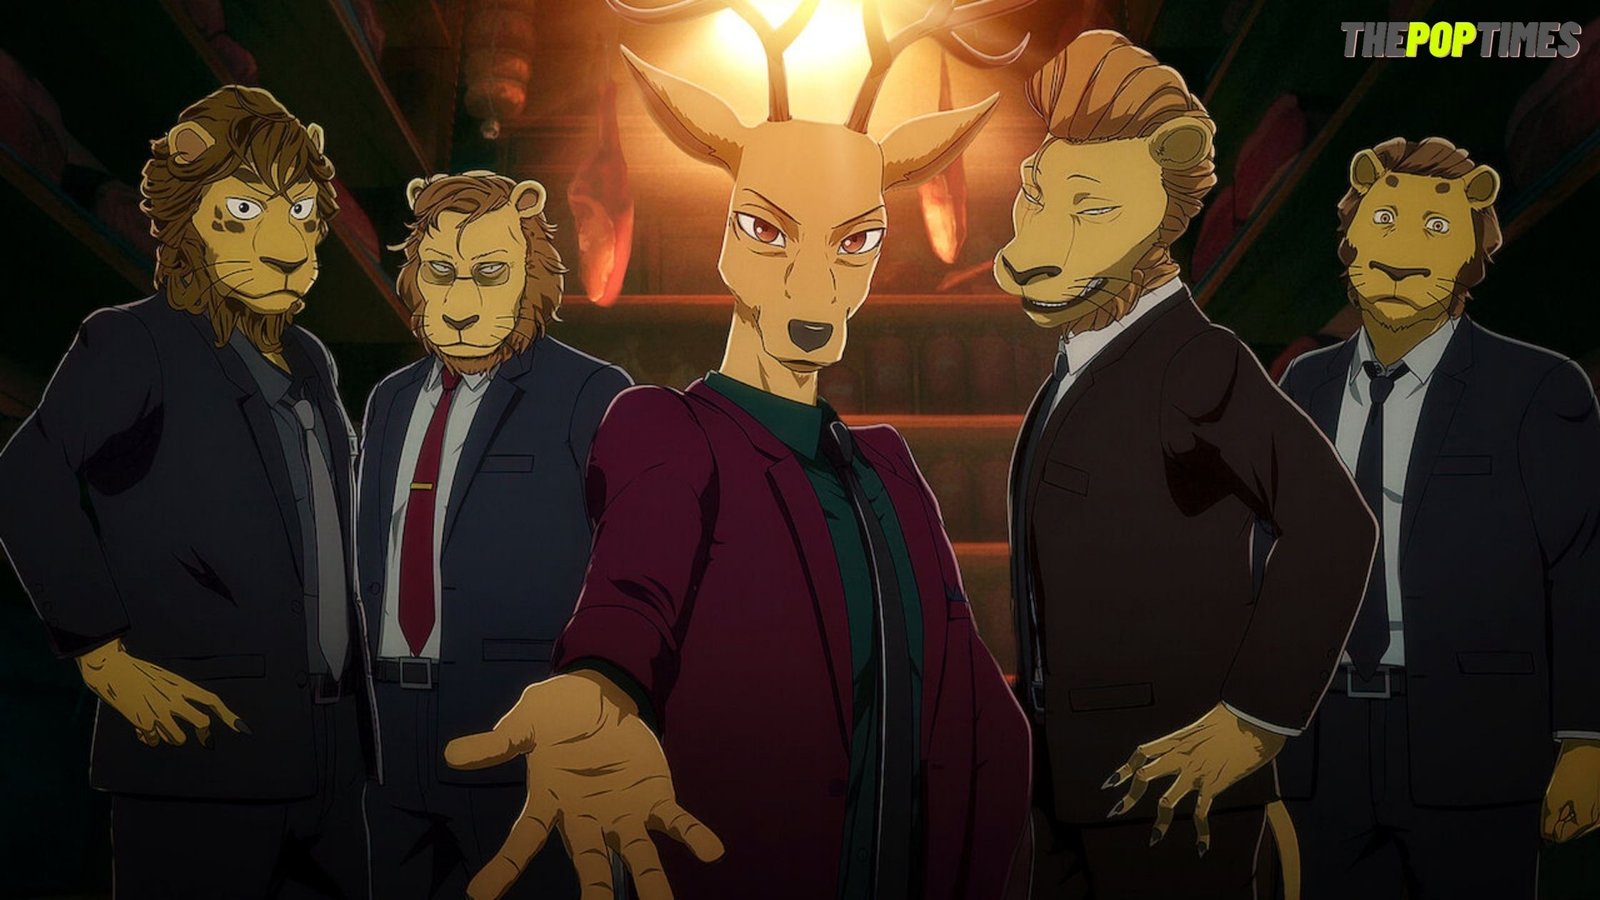 Beastars Season Release Date Is Yet To Be Announced Thepoptimes